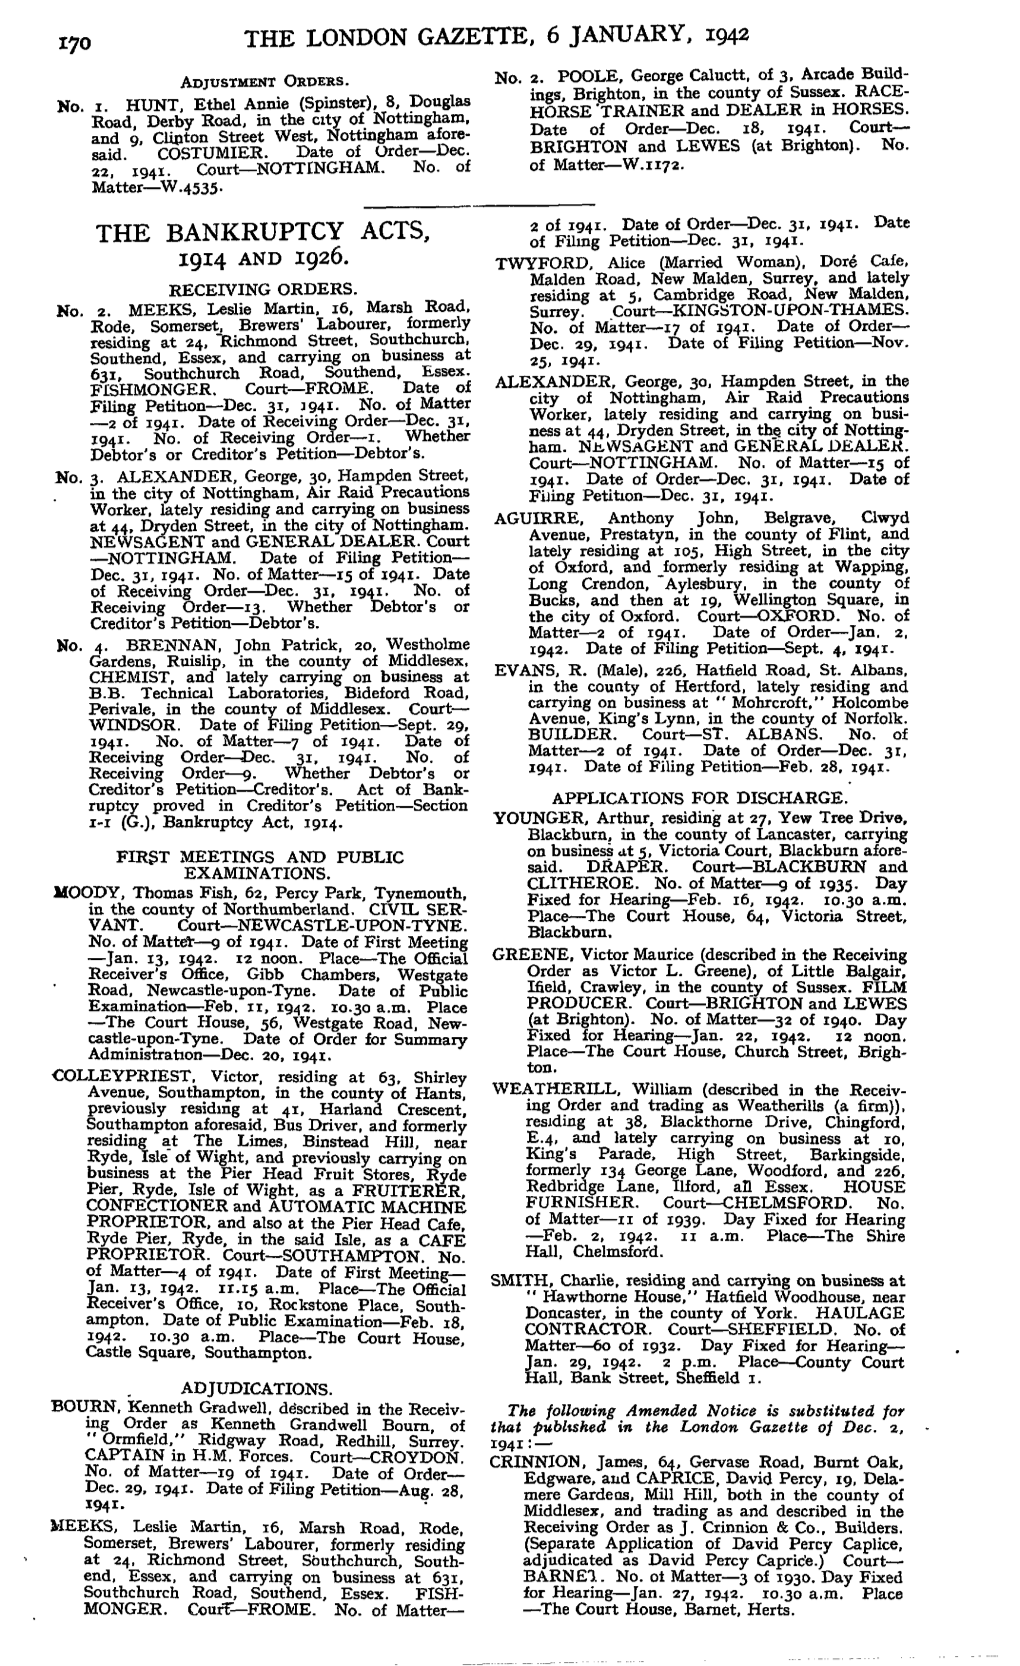 The London Gazette, 6 January, 1942 the Bankruptcy Acts